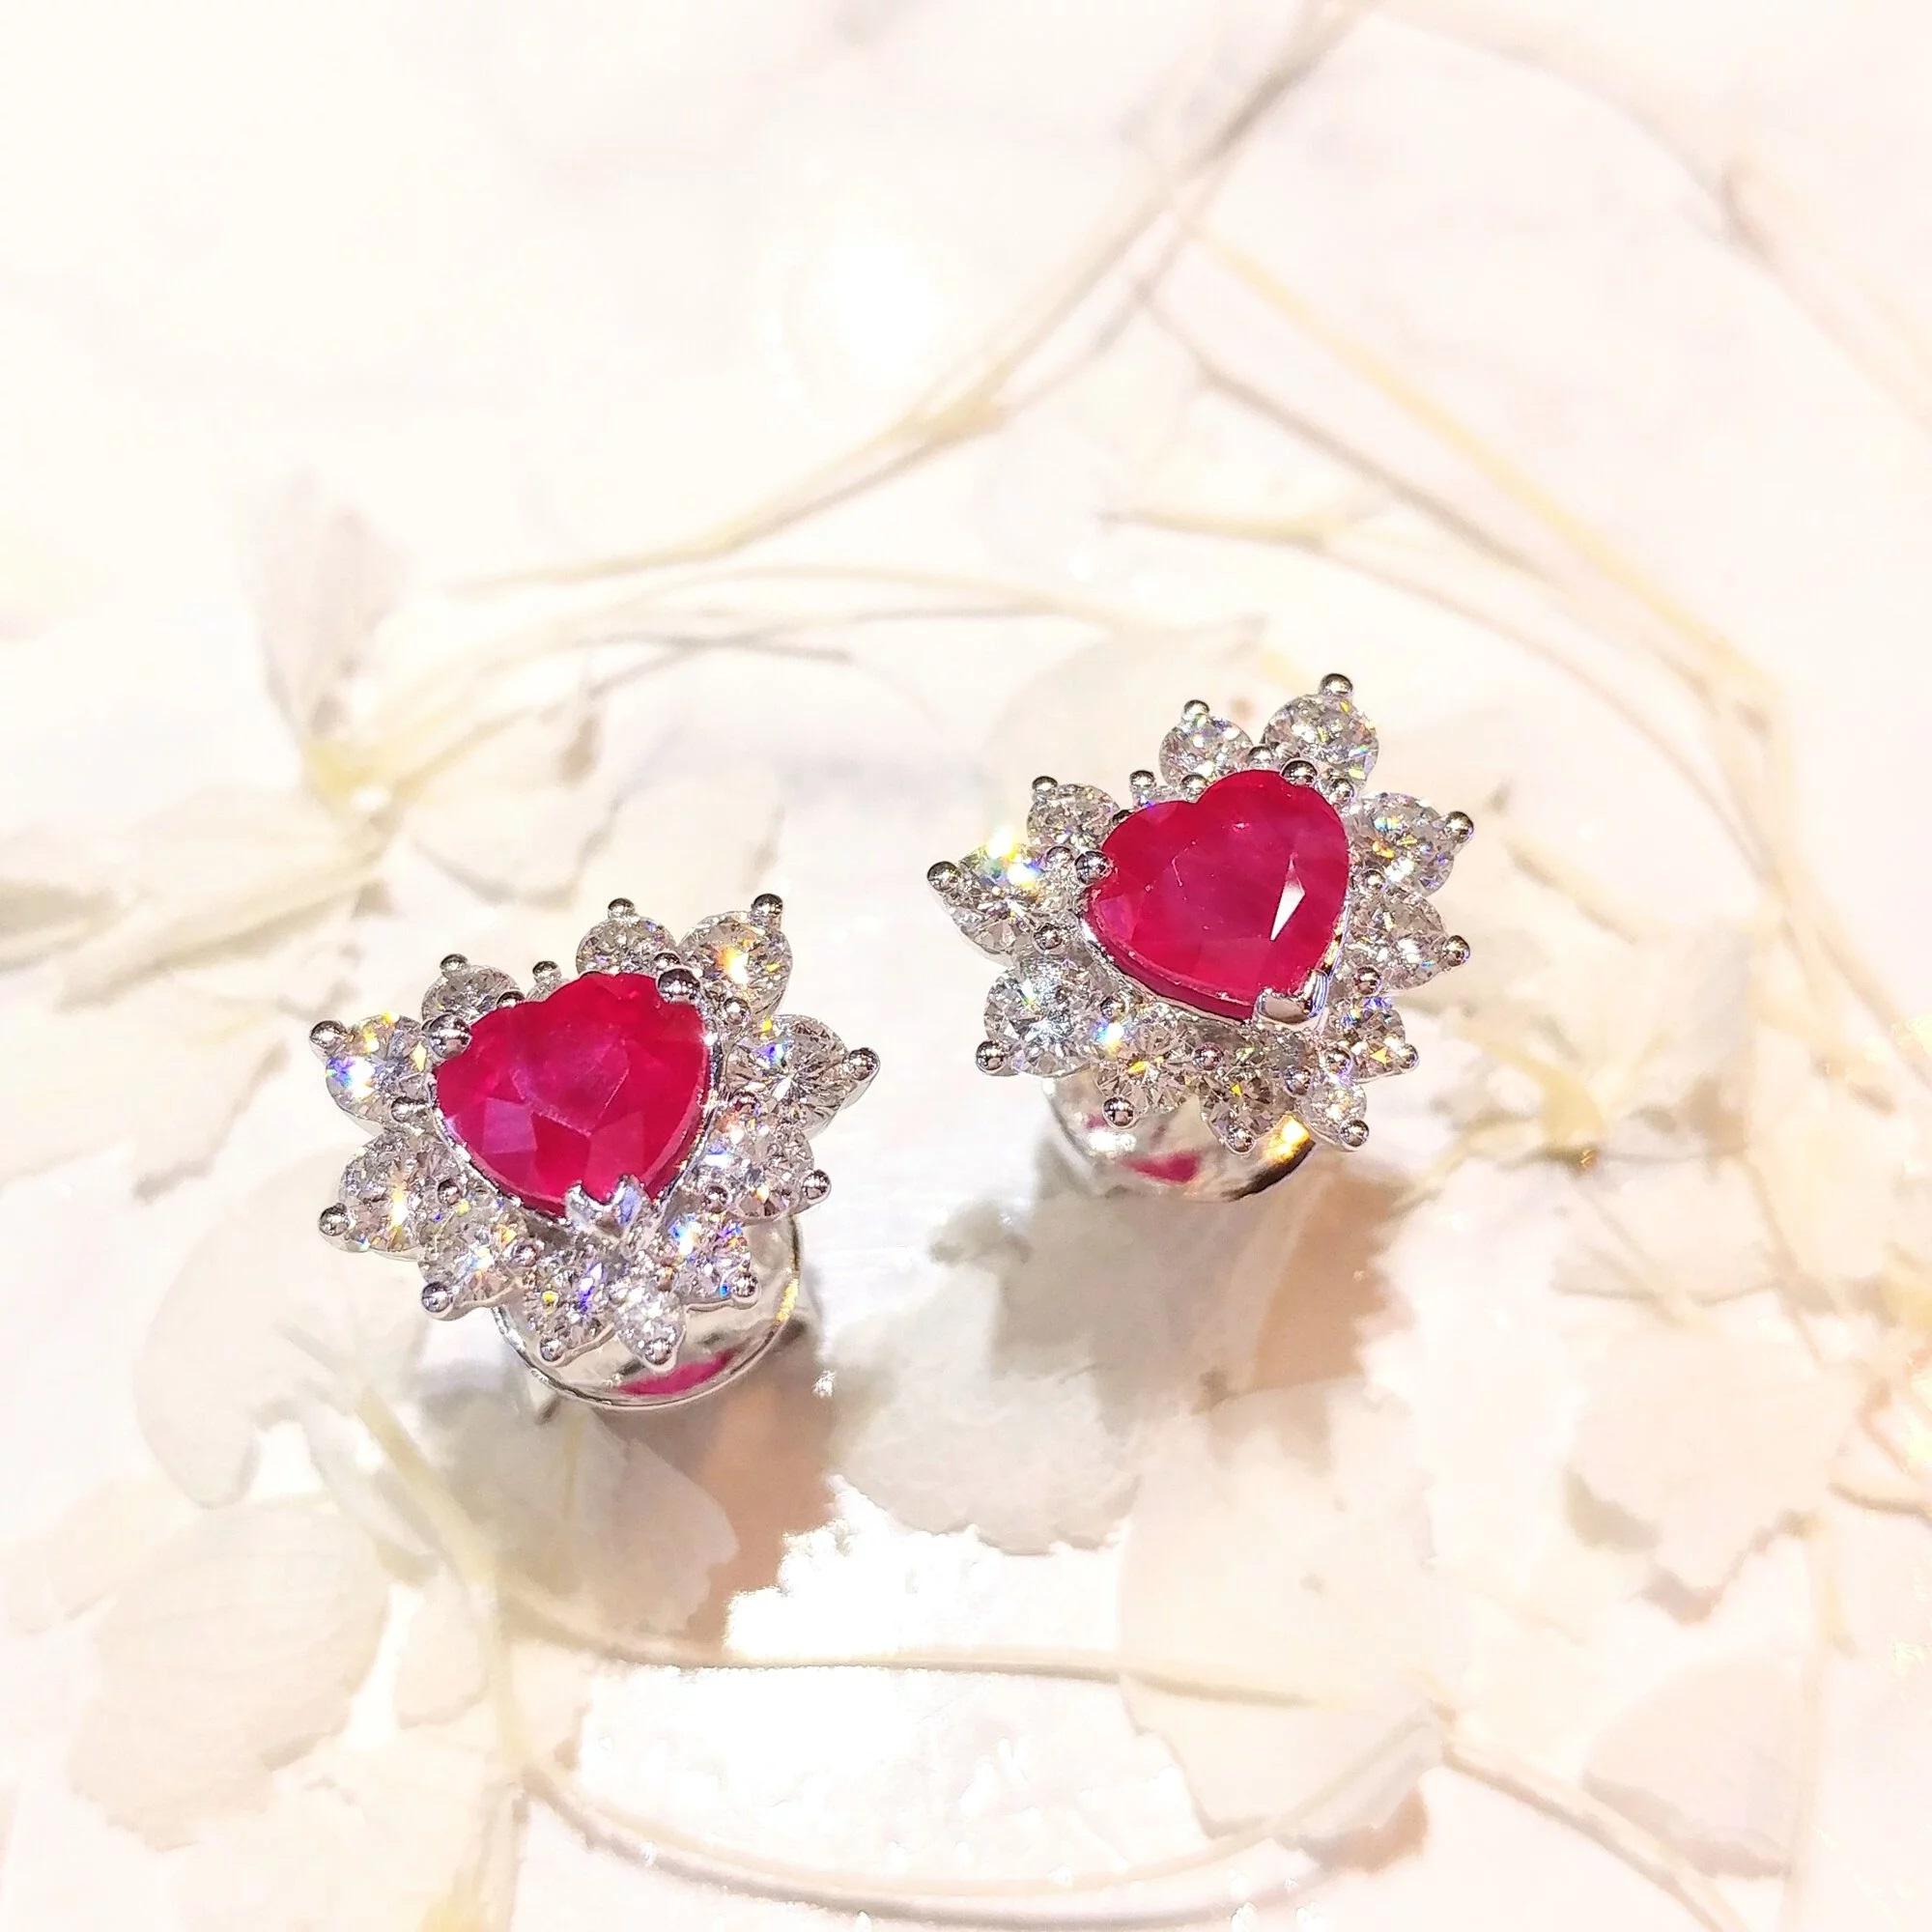 Burmese rubies are sought after for their beautiful red tones. These 18k white gold earrings featuring a 2.23 carat rare heart-shaped ruby is a great example of the Burmese allure - deep red tones with the slightest hint of purple. Halo set with